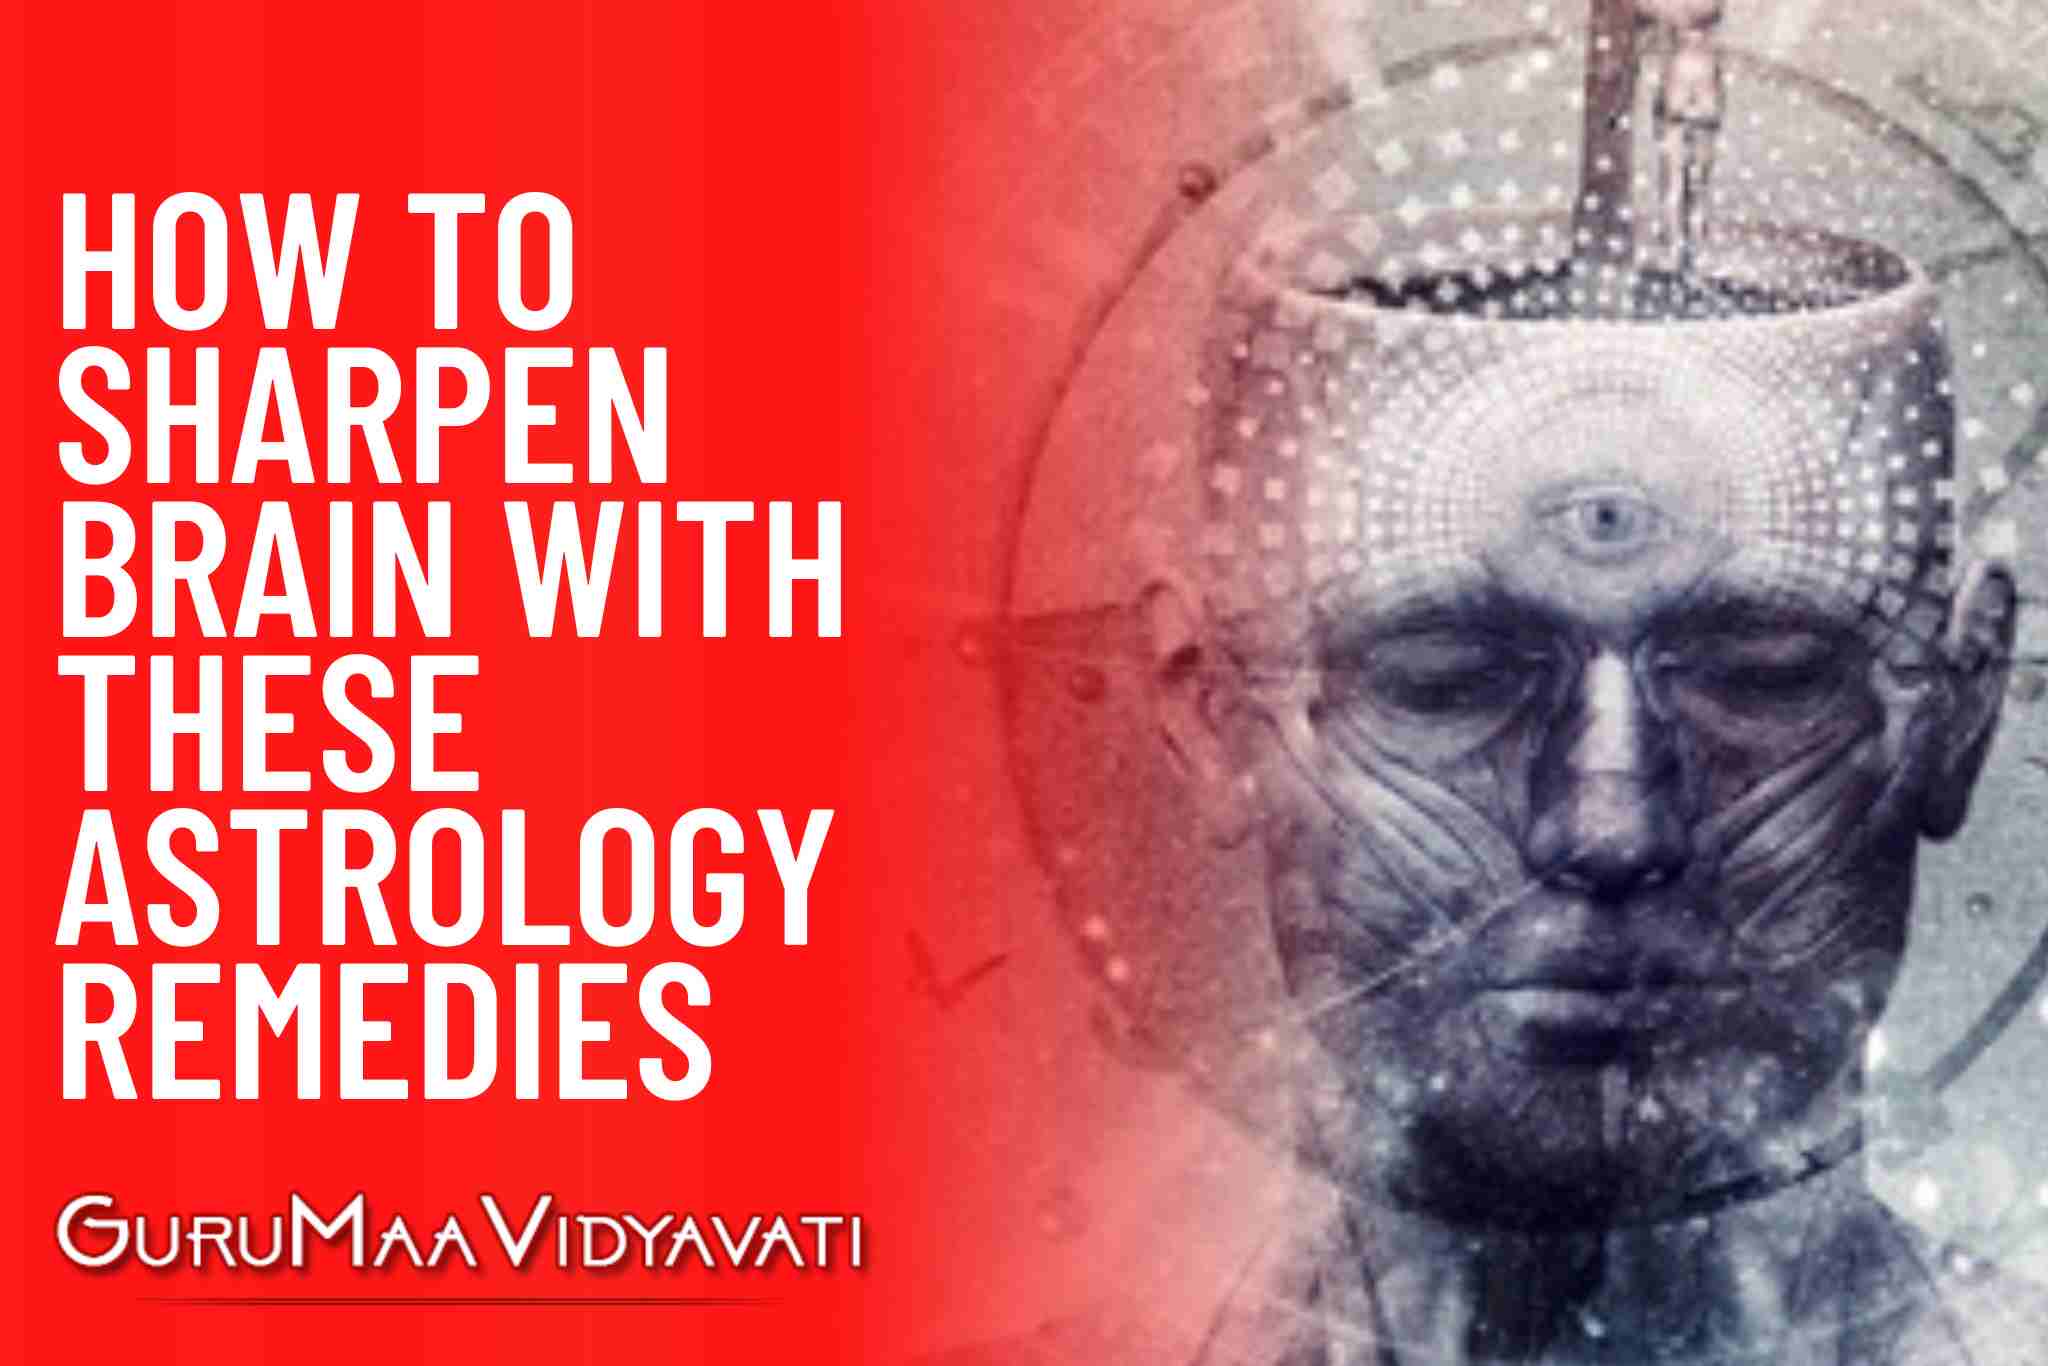 How to Sharpen Brain with These Astrology Remedies